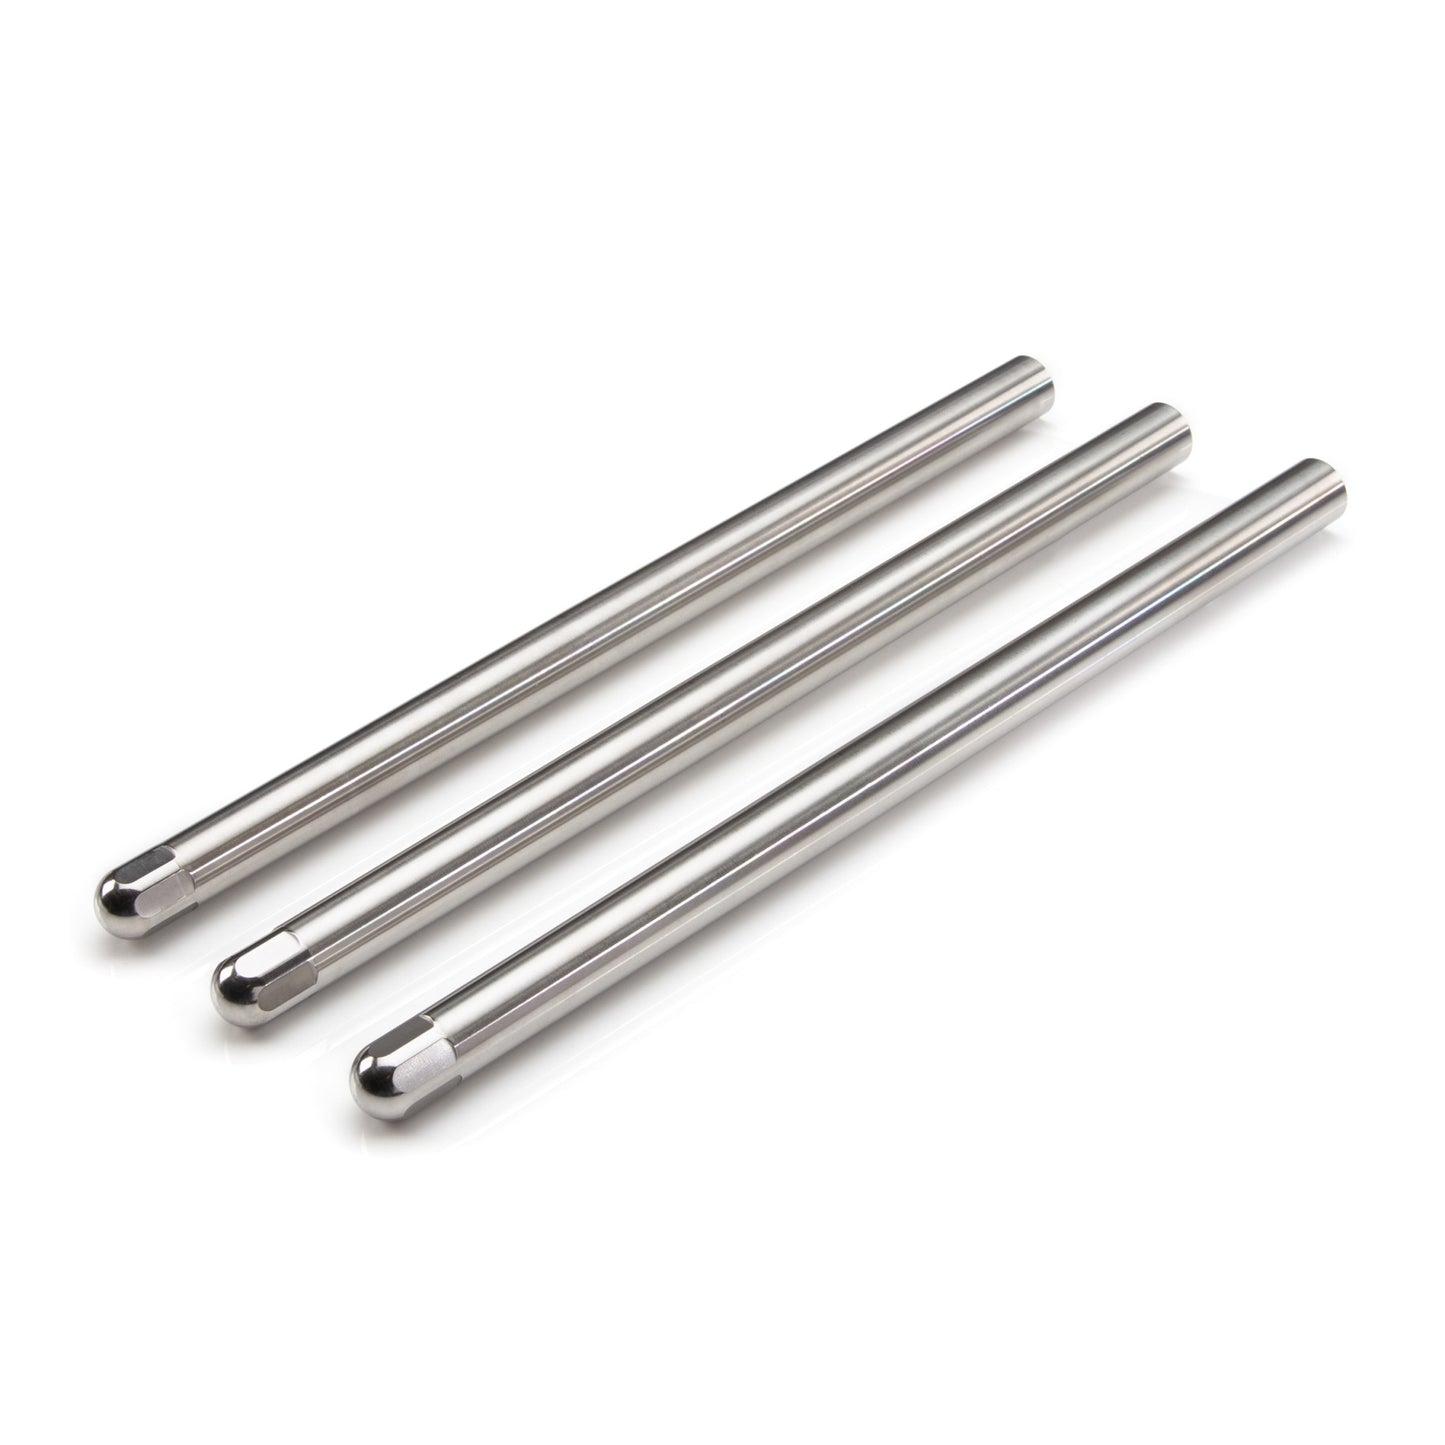 3-Piece Stainless Steel Female 1/2-Inch x 20 Hex End Extra-Long Wheel Hanger and Lug Guide Tool Set